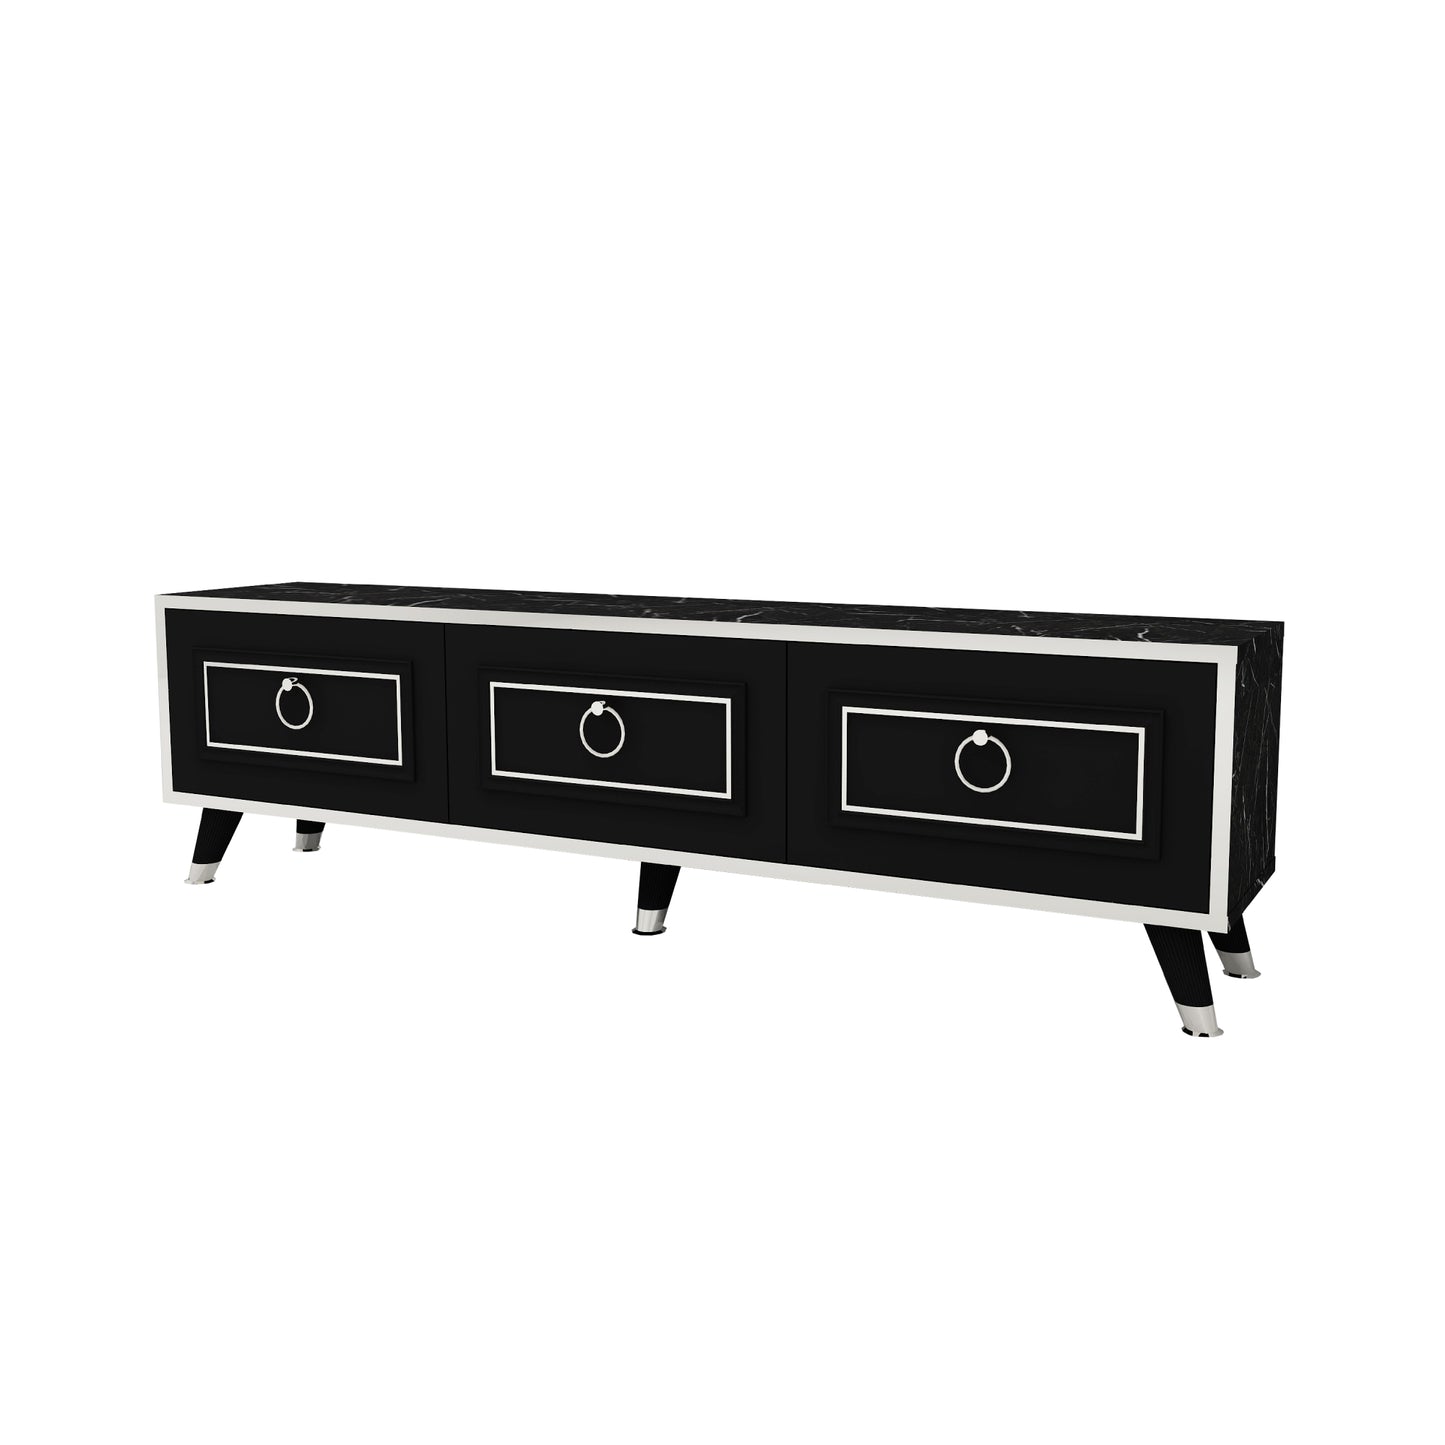 Esmera 150 cm Wide TV Stand and Media Console with Cabinets